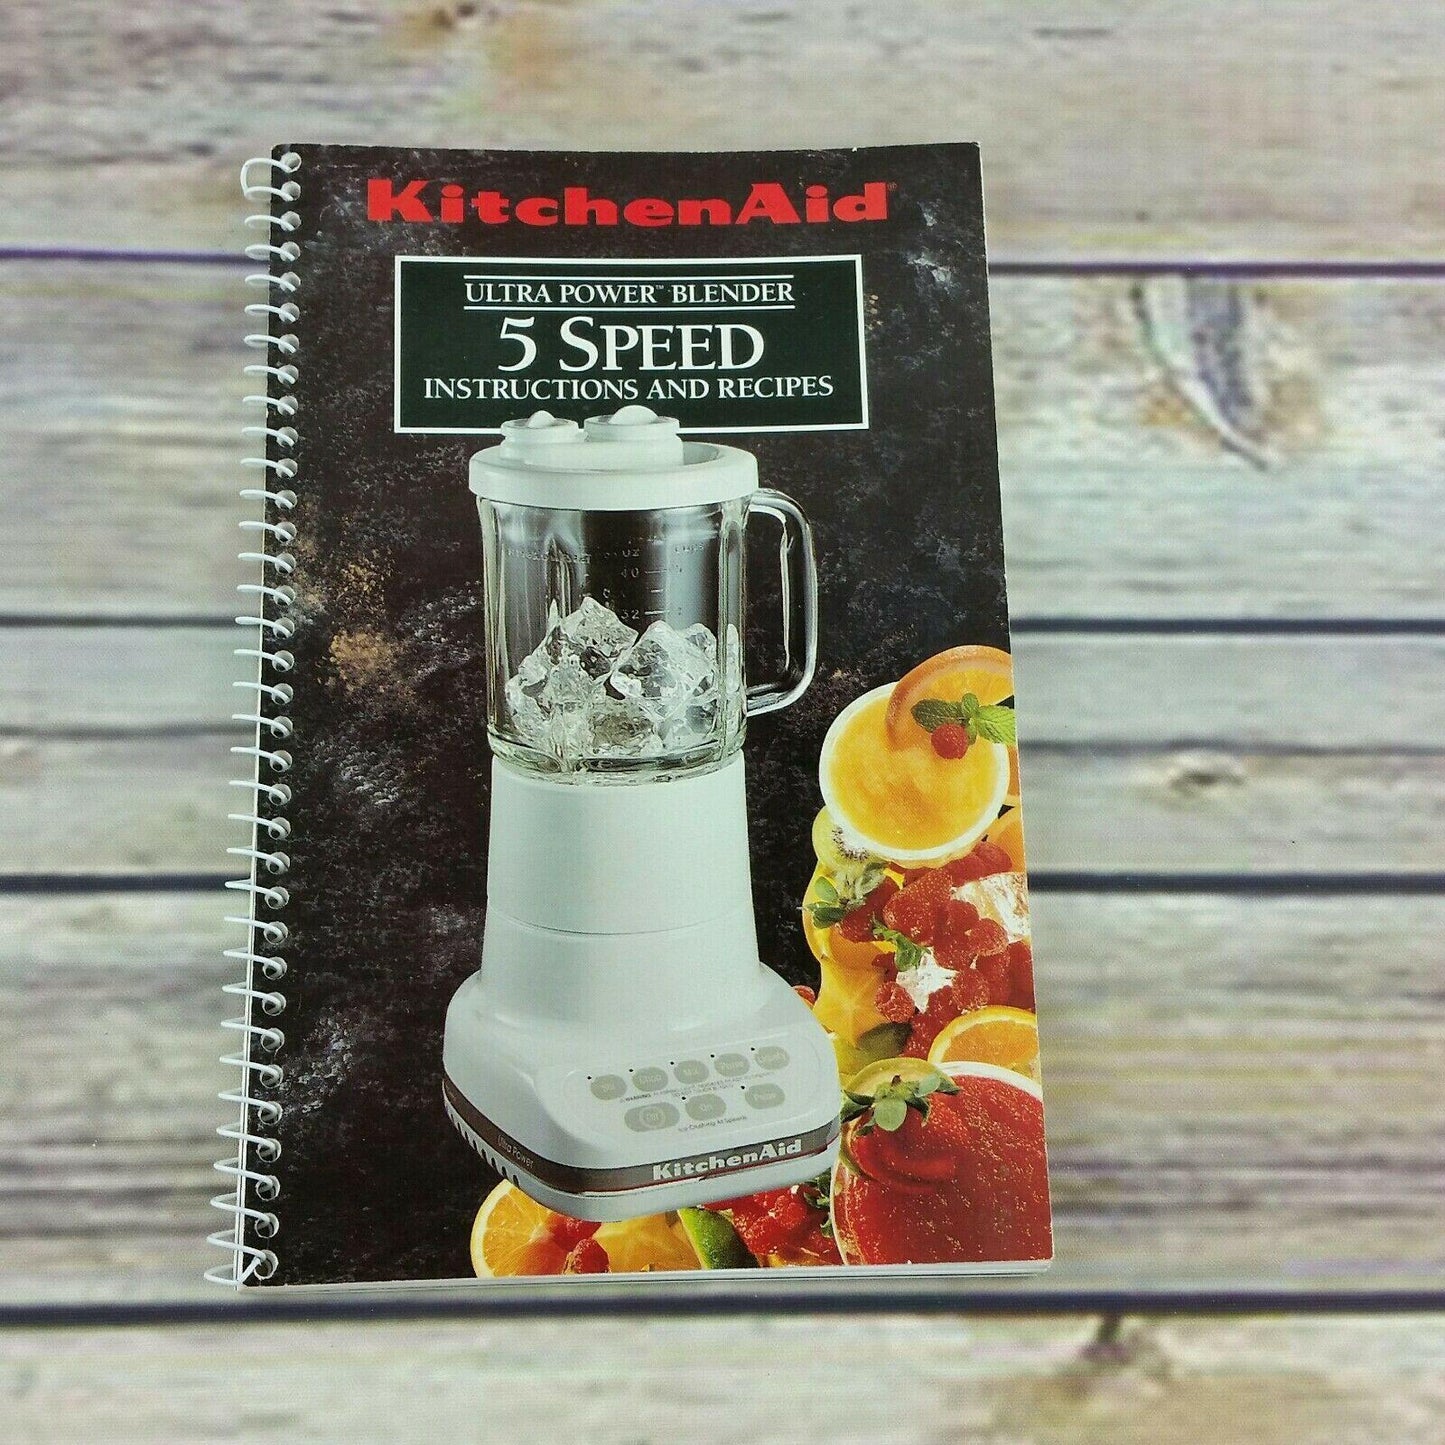 Kitchen Aid 5 Speed Ultra Power Blender Manual and Recipes KSB5